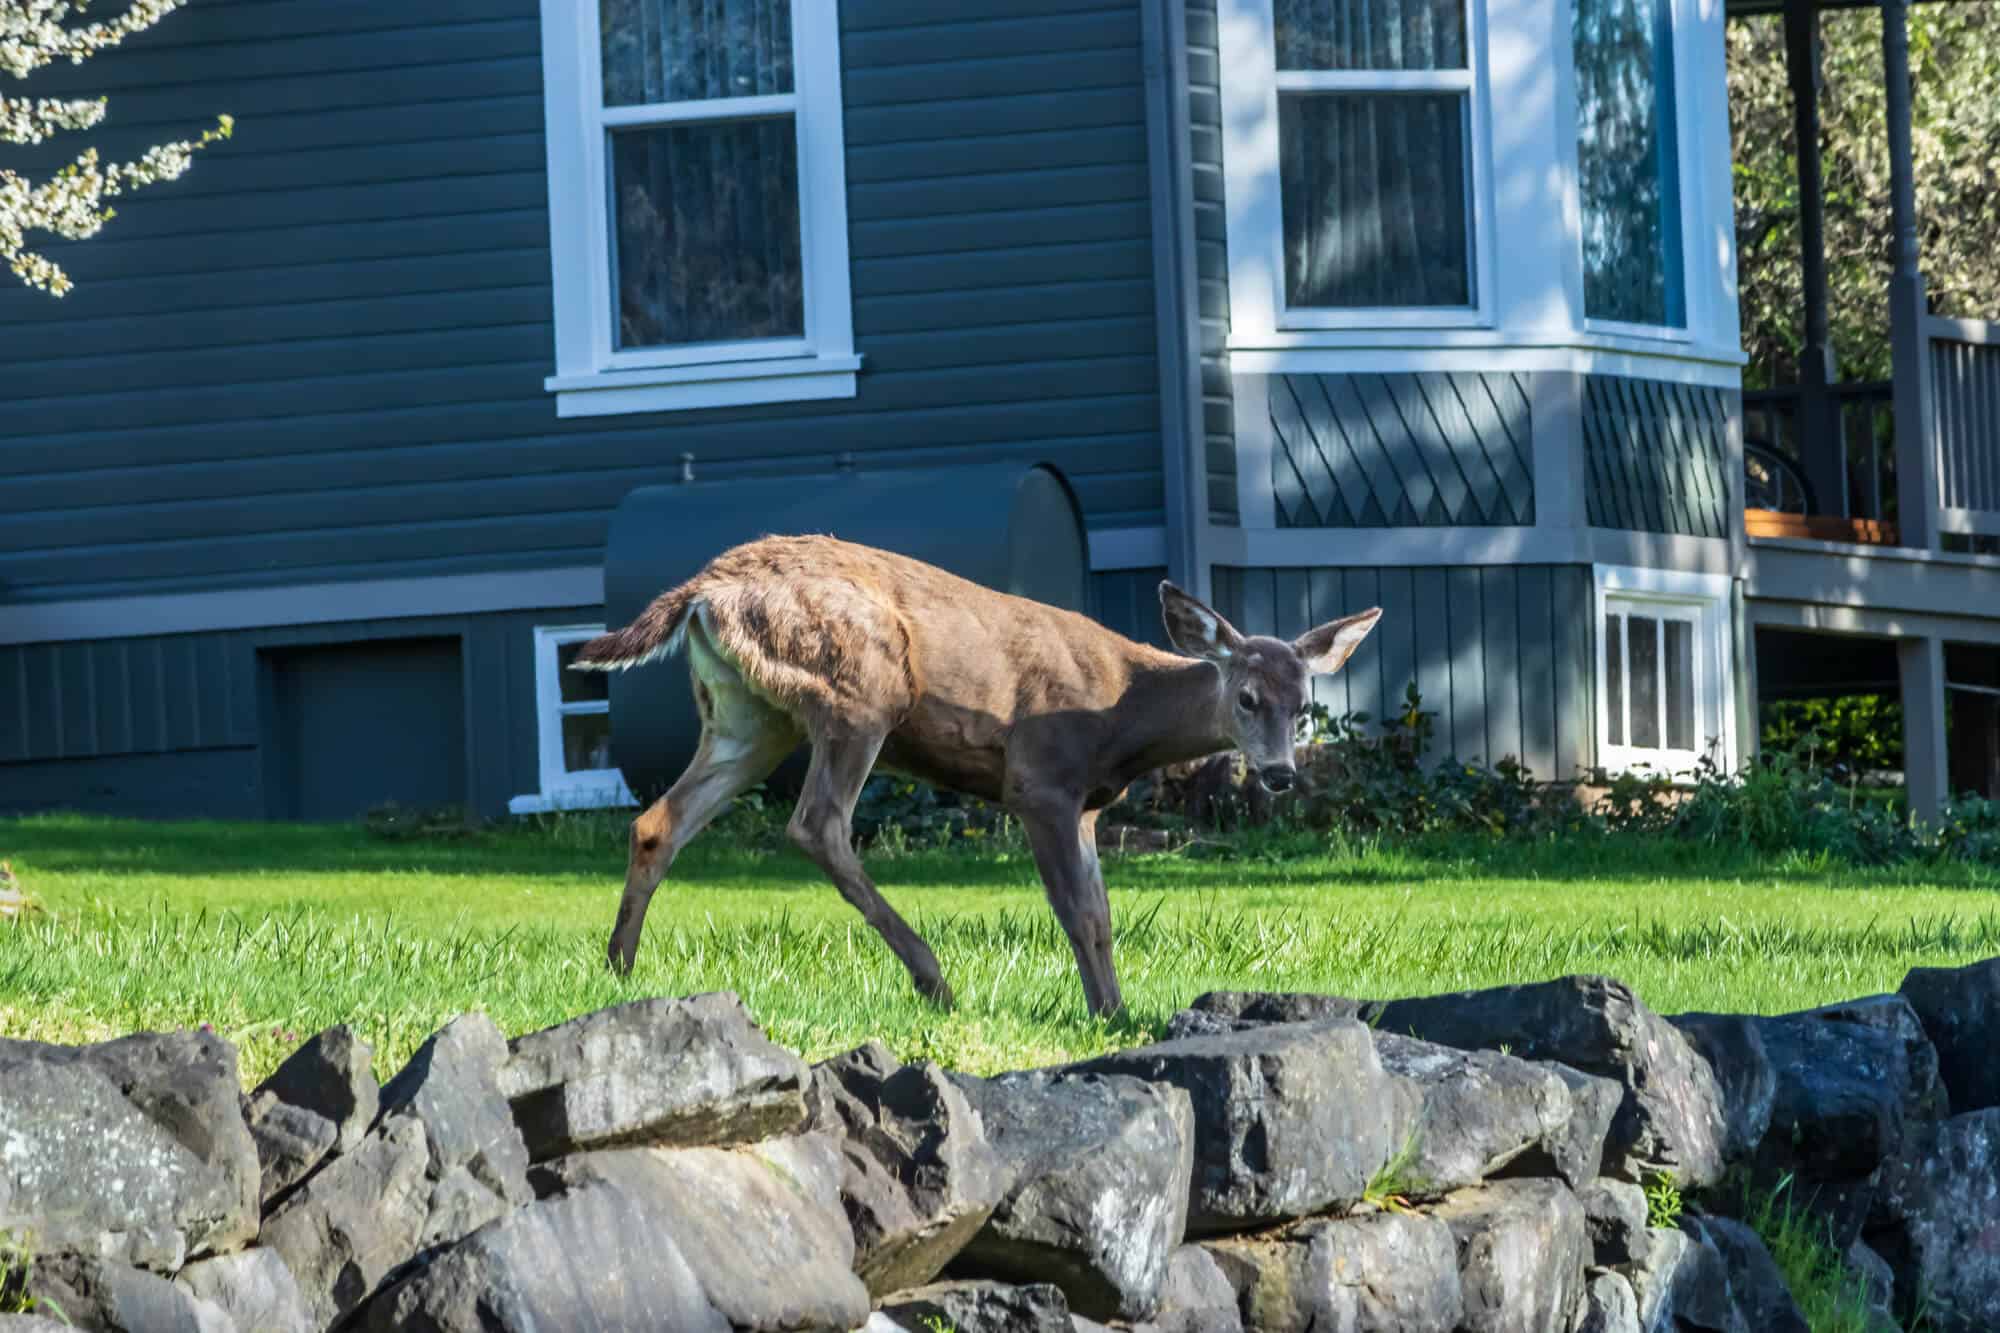 Deer on someone's front lawn